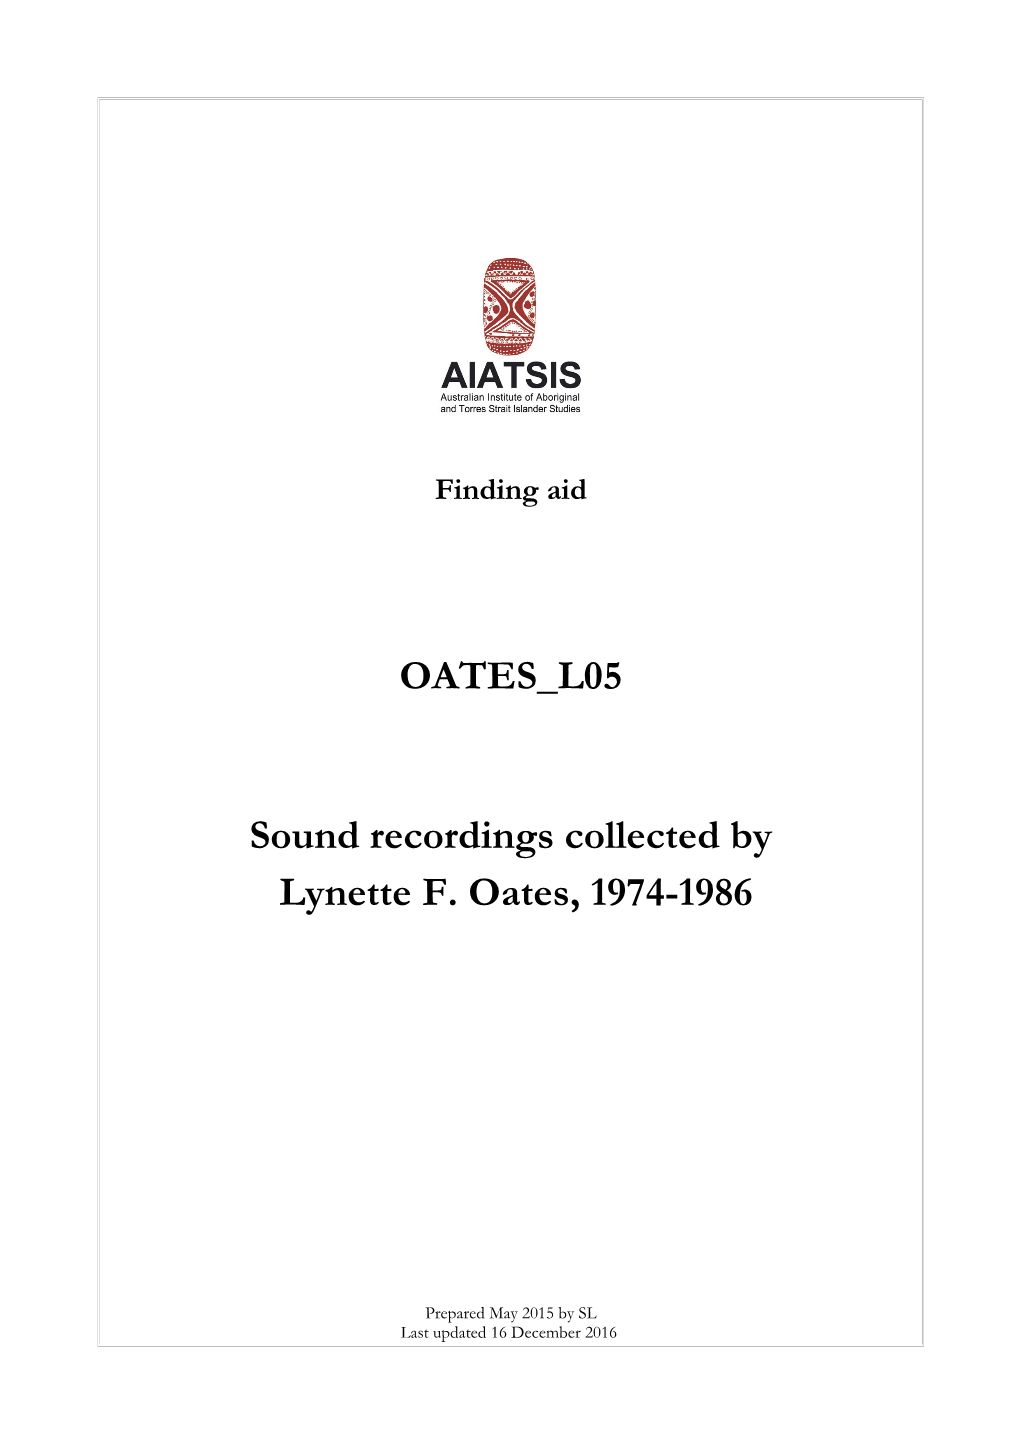 Guide to Field Recordings Collected by Lynette F. Oates 1974-1986